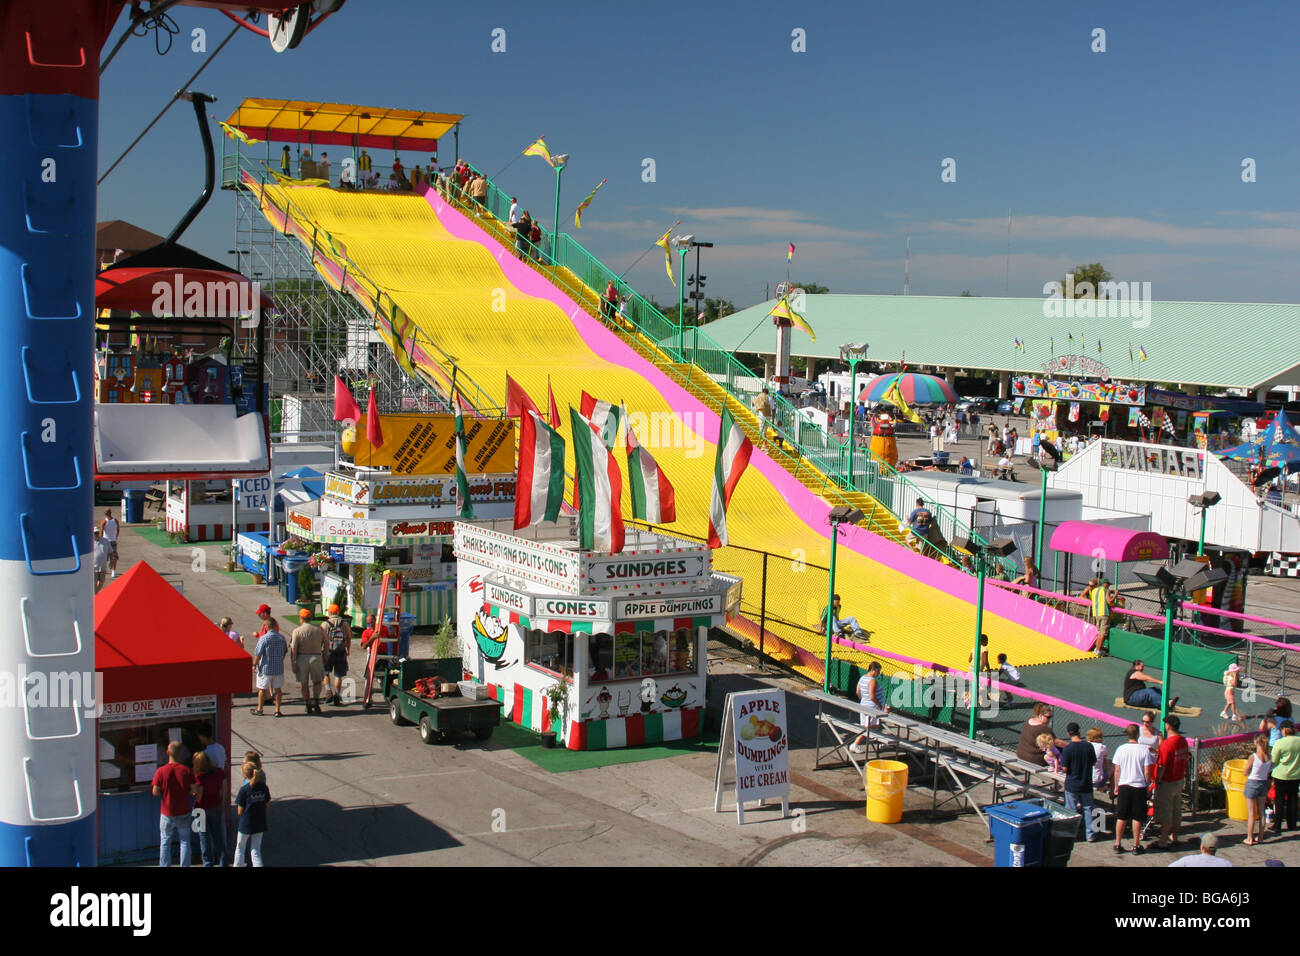 Slide Carnival Ride with Food Vendors. View from the Sky Glider cable car ride. Ohio State Fair. Columbus, Ohio, USA. Stock Photo